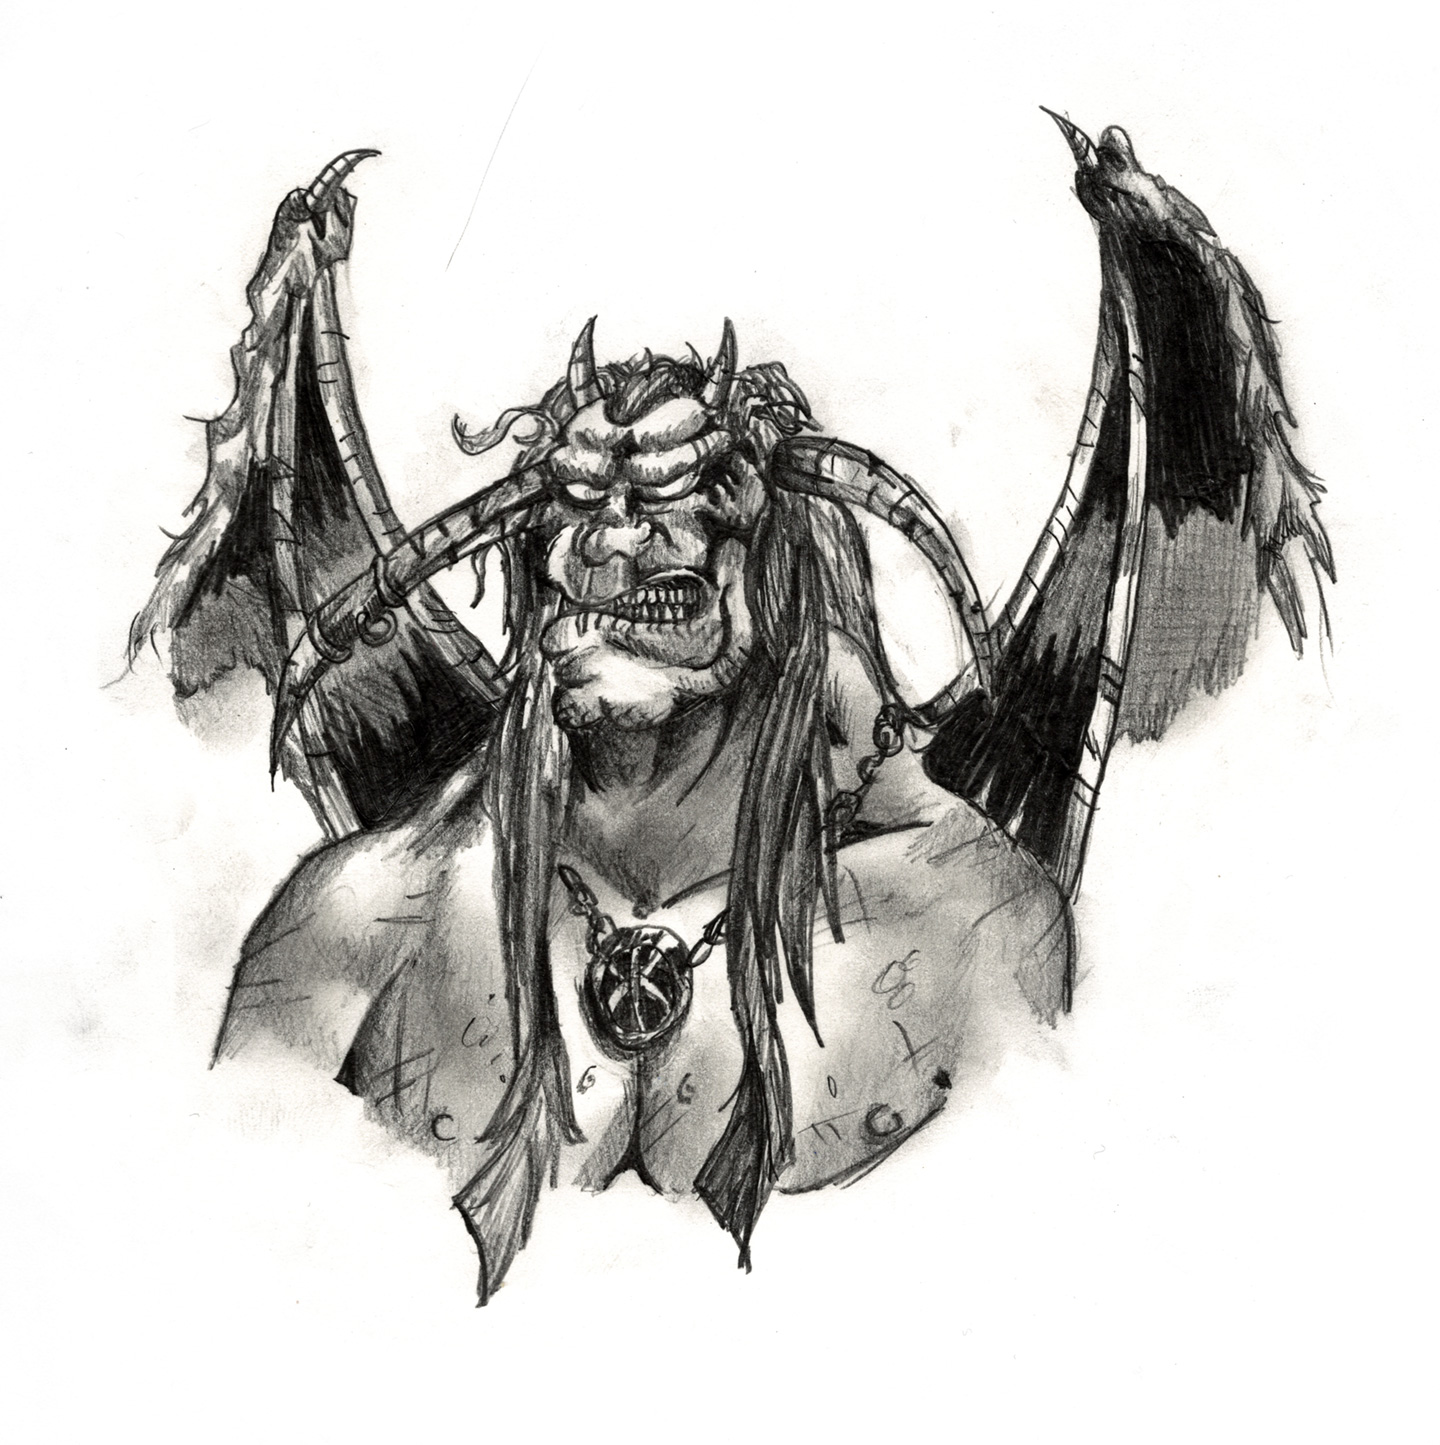 A drawing about a demon from Warcraft II